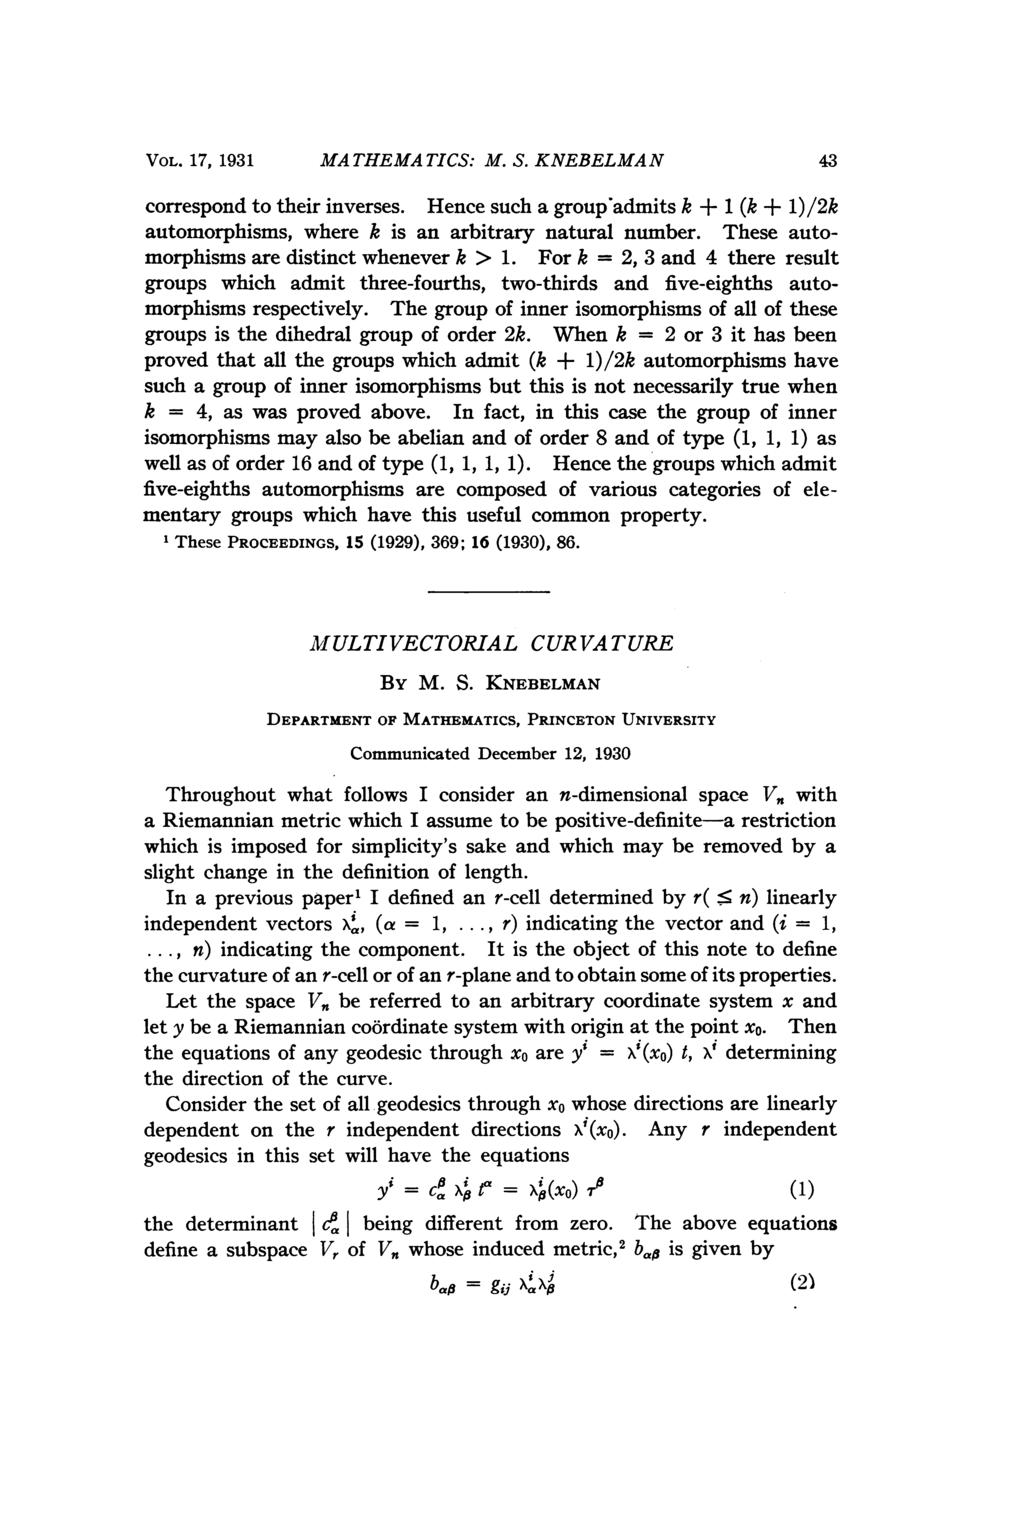 VOL. 17, 1931 MA THEMA TICS: M. S. KNEBELMAN 43 correspond to their inverses. Hence such a group admits k + 1 (k + 1)/2k automorphisms, where k is an arbitrary natural number.